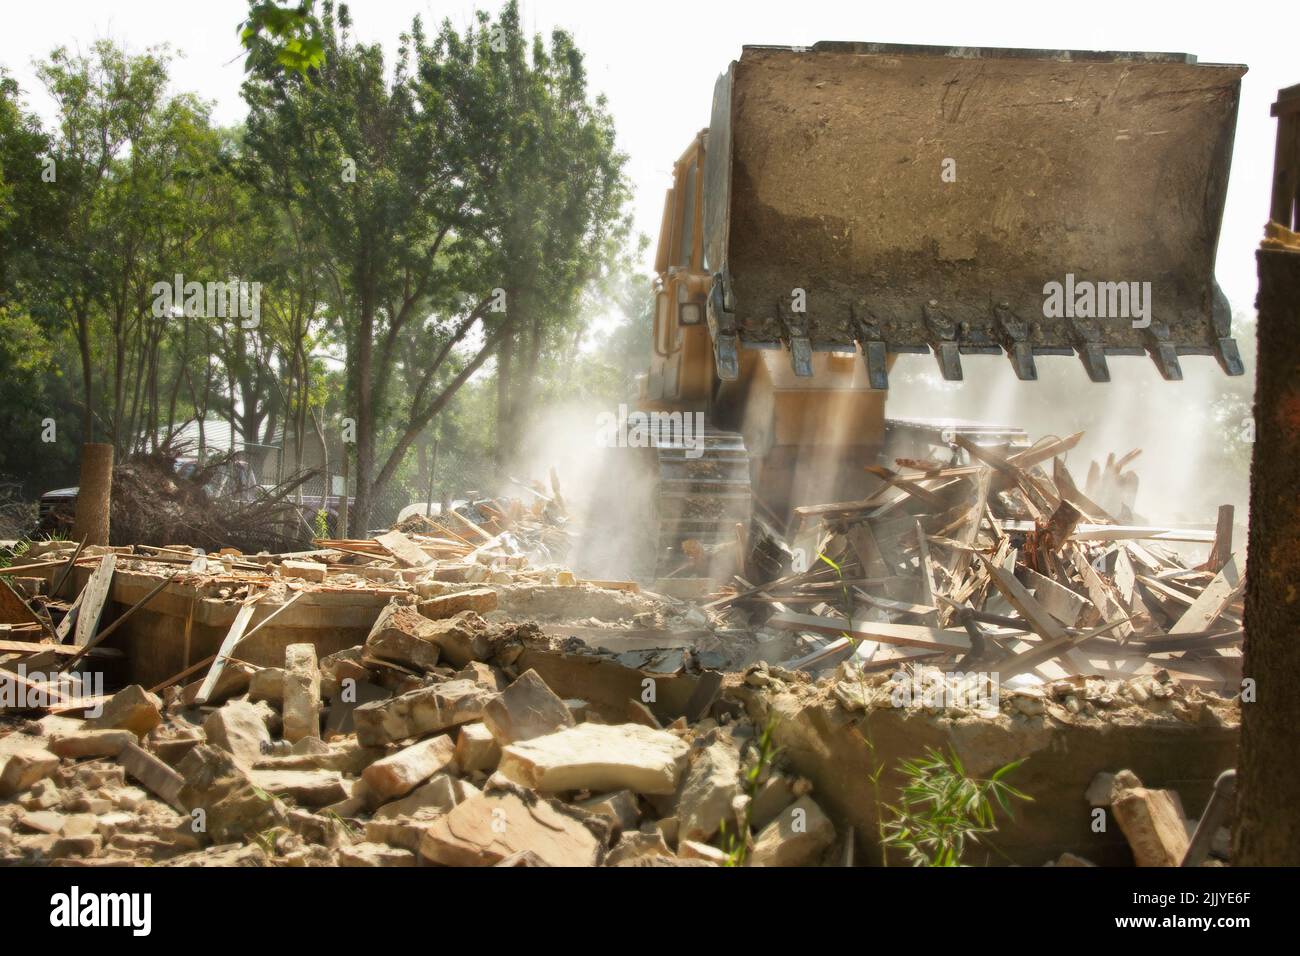 Demolition of residential home with bulldozer preparing for new construction Stock Photo